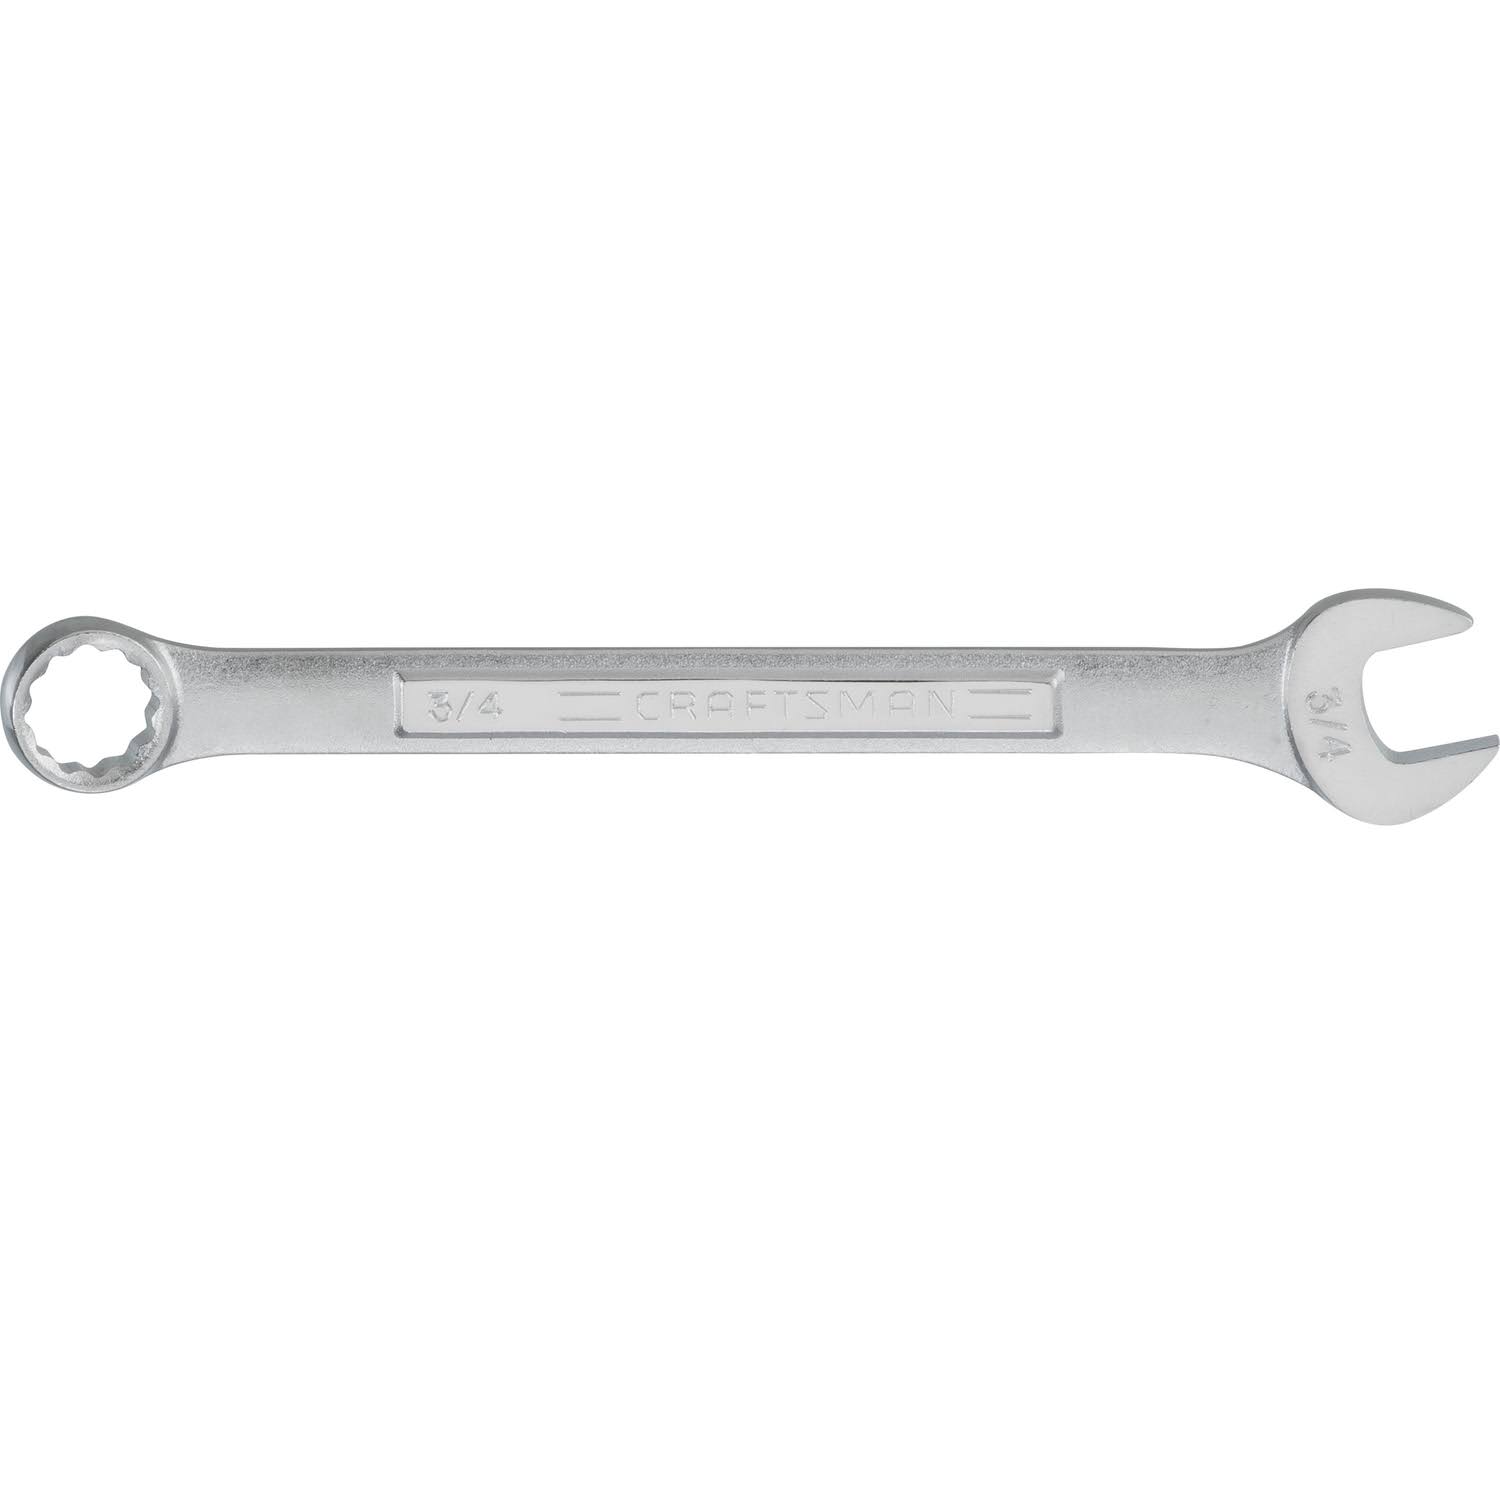 Craftsman Combination Wrench, SAE, 3/4-Inch (CMMT44701)